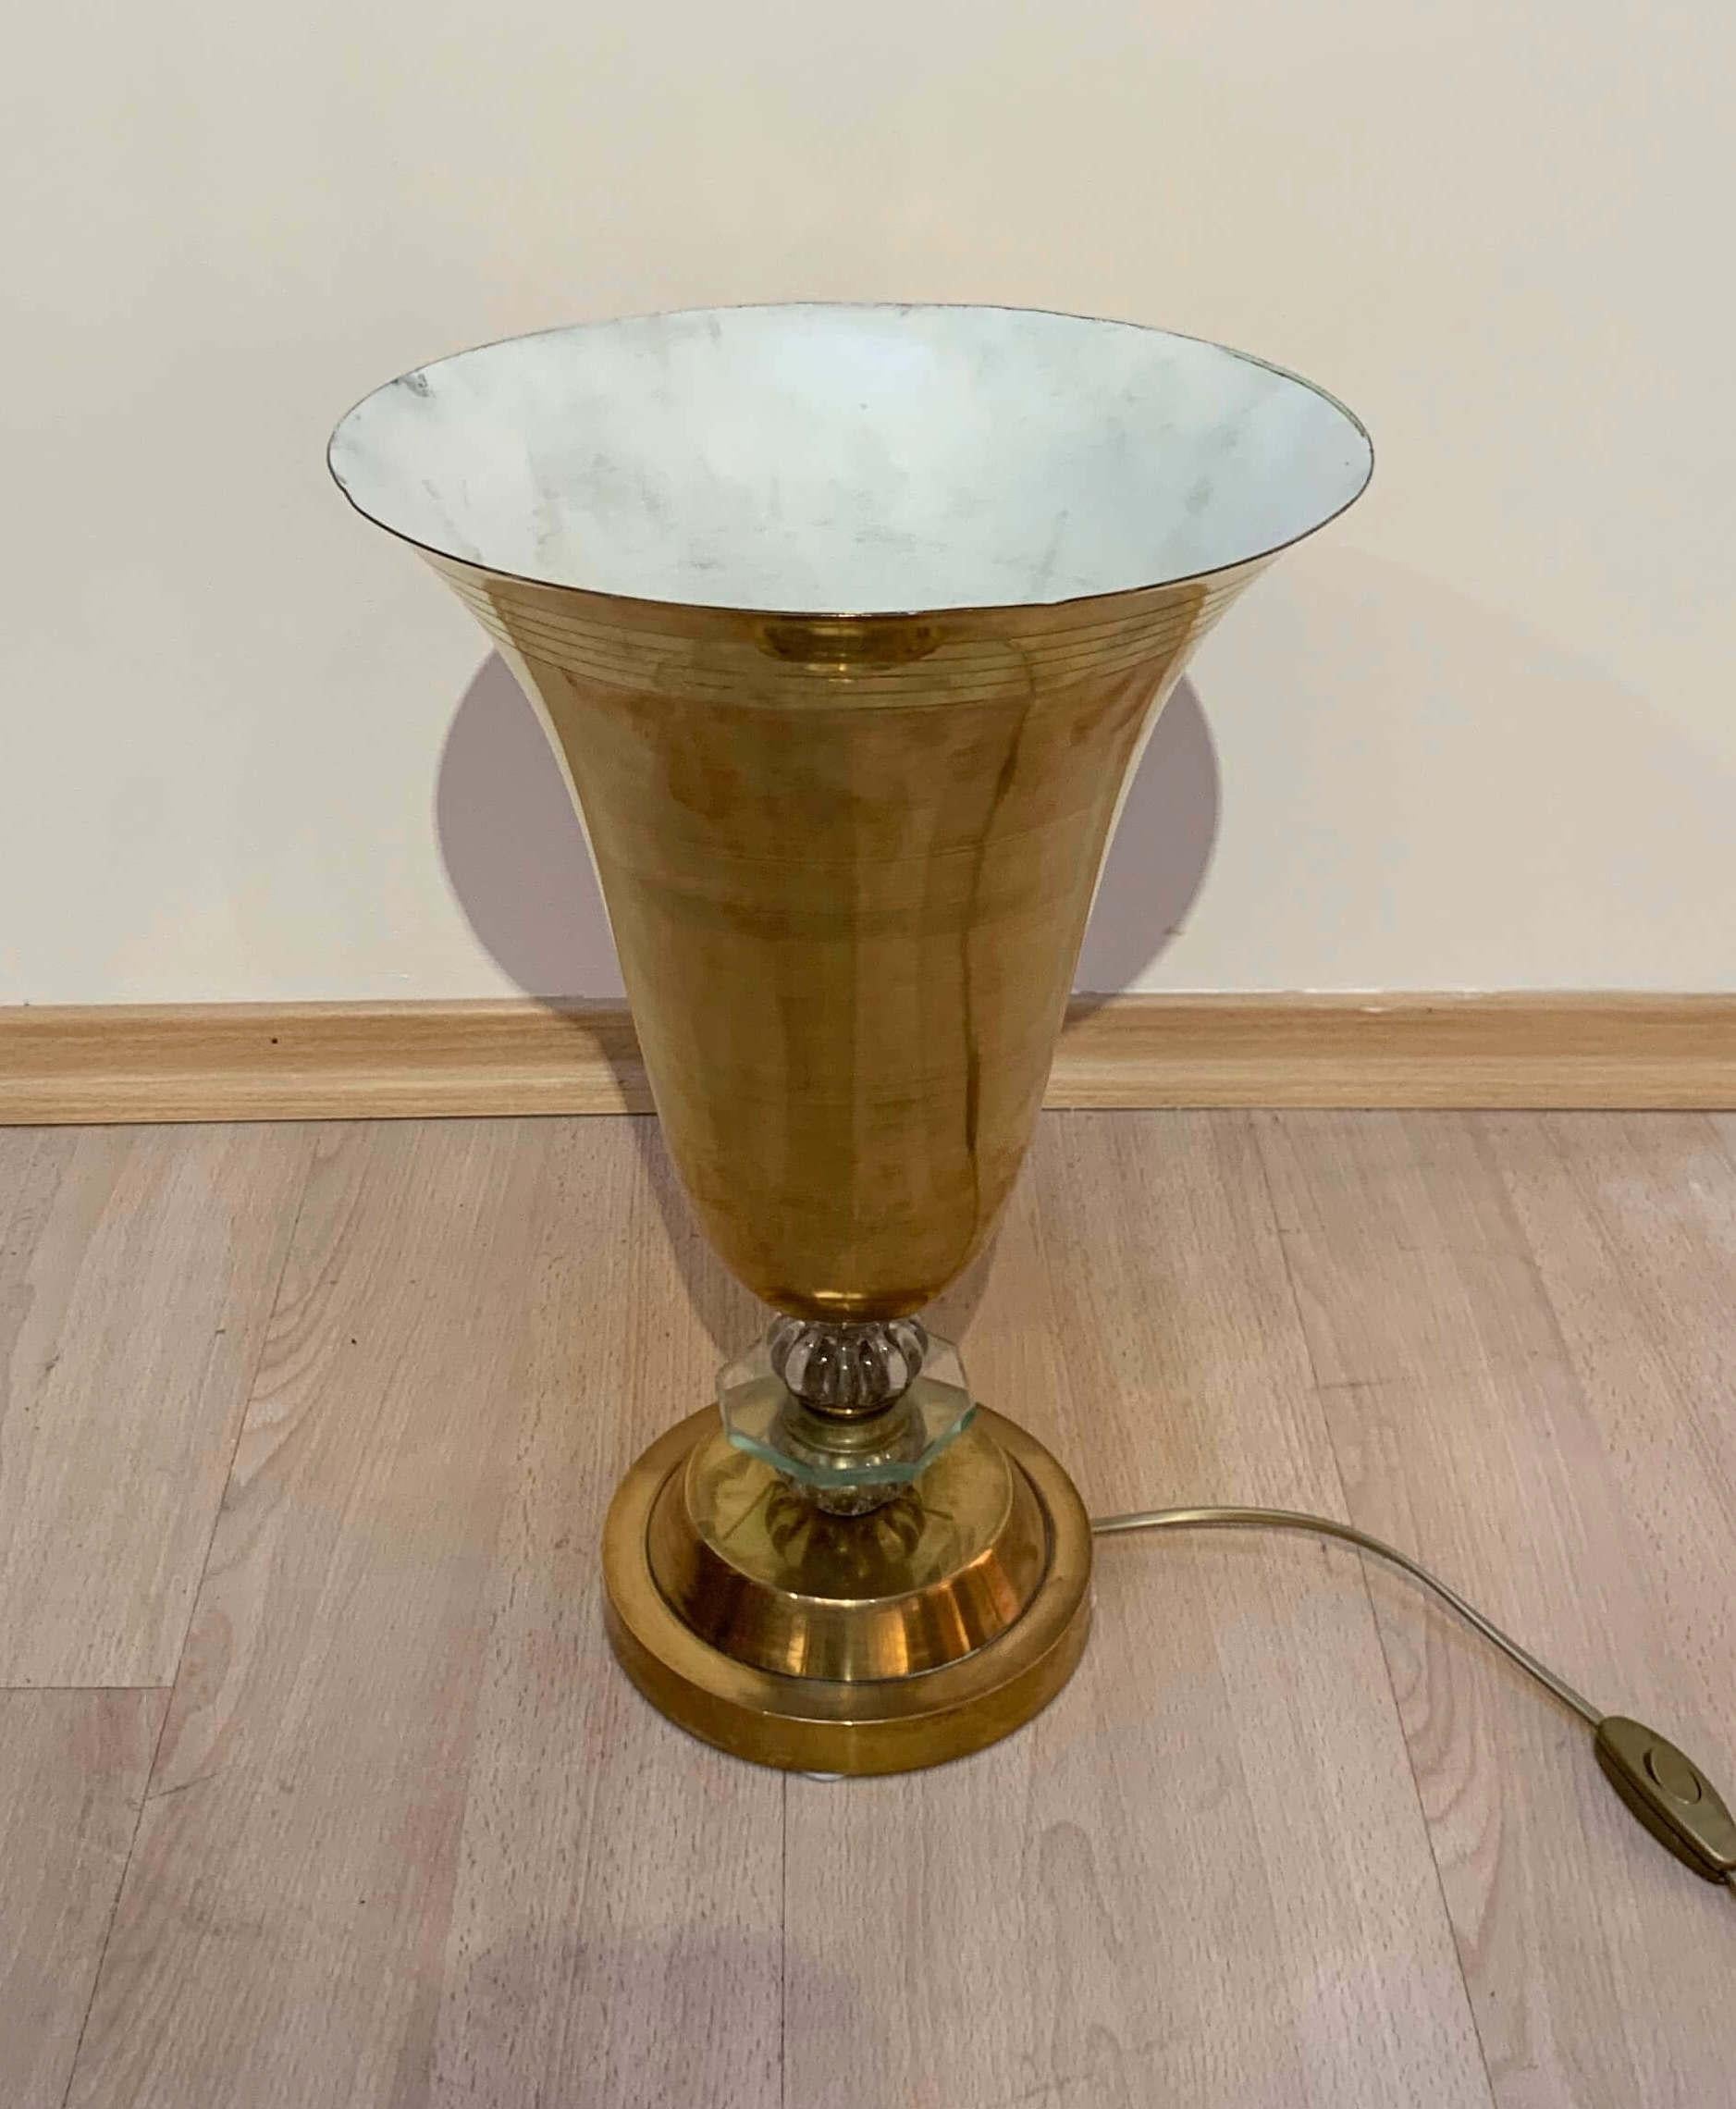 Art Deco table lamp, brass and glass from Paris, France, circa 1930
Polished brass body in elegant conical shape with engraved horizontal rings. Cut glass ring decorative balls at the leg. 1 light bulb in the socket.